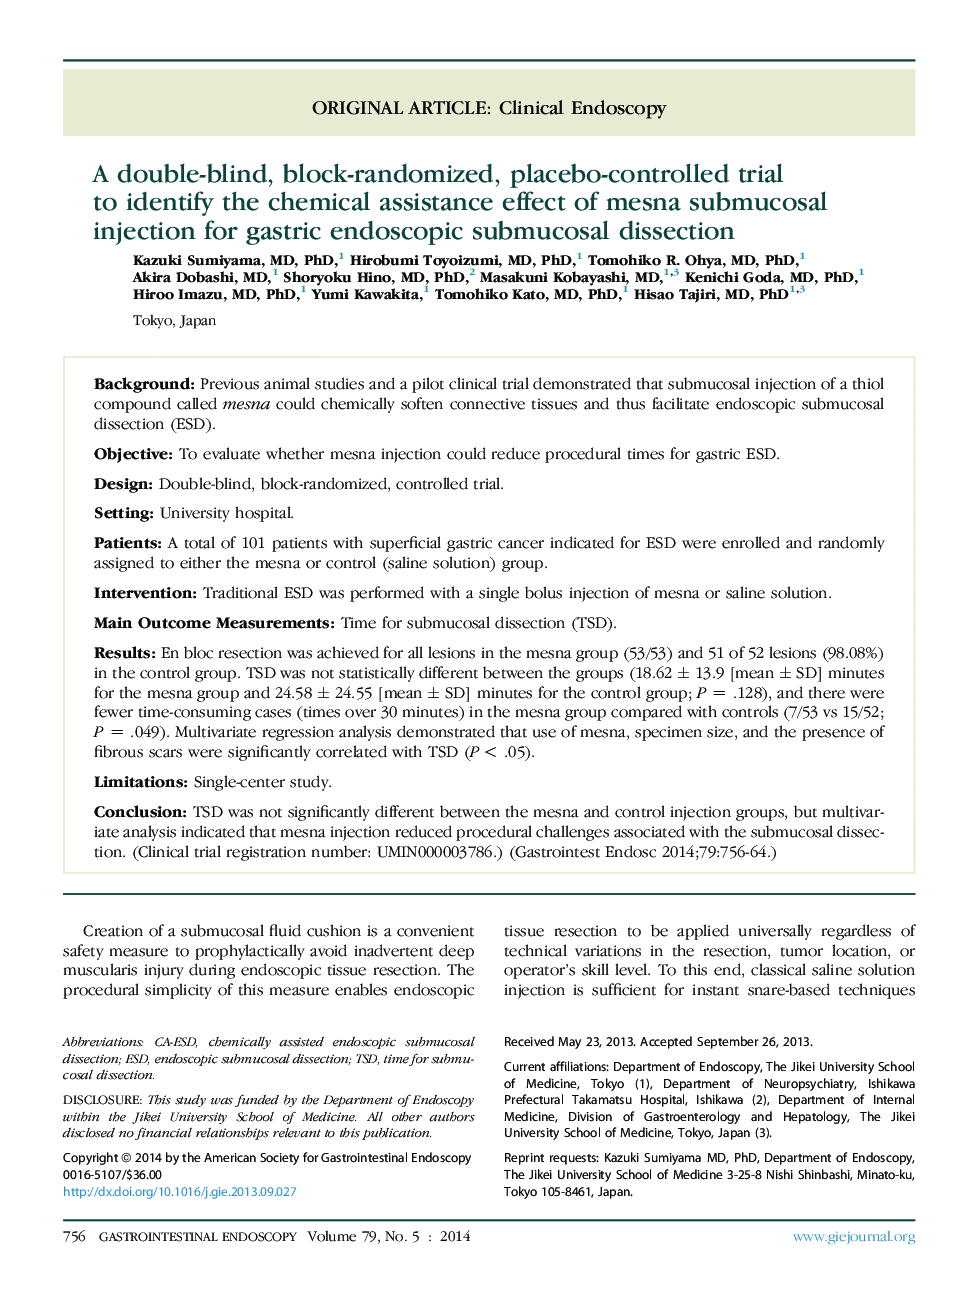 A double-blind, block-randomized, placebo-controlled trial to identify the chemical assistance effect of mesna submucosal injection for gastric endoscopic submucosal dissection 